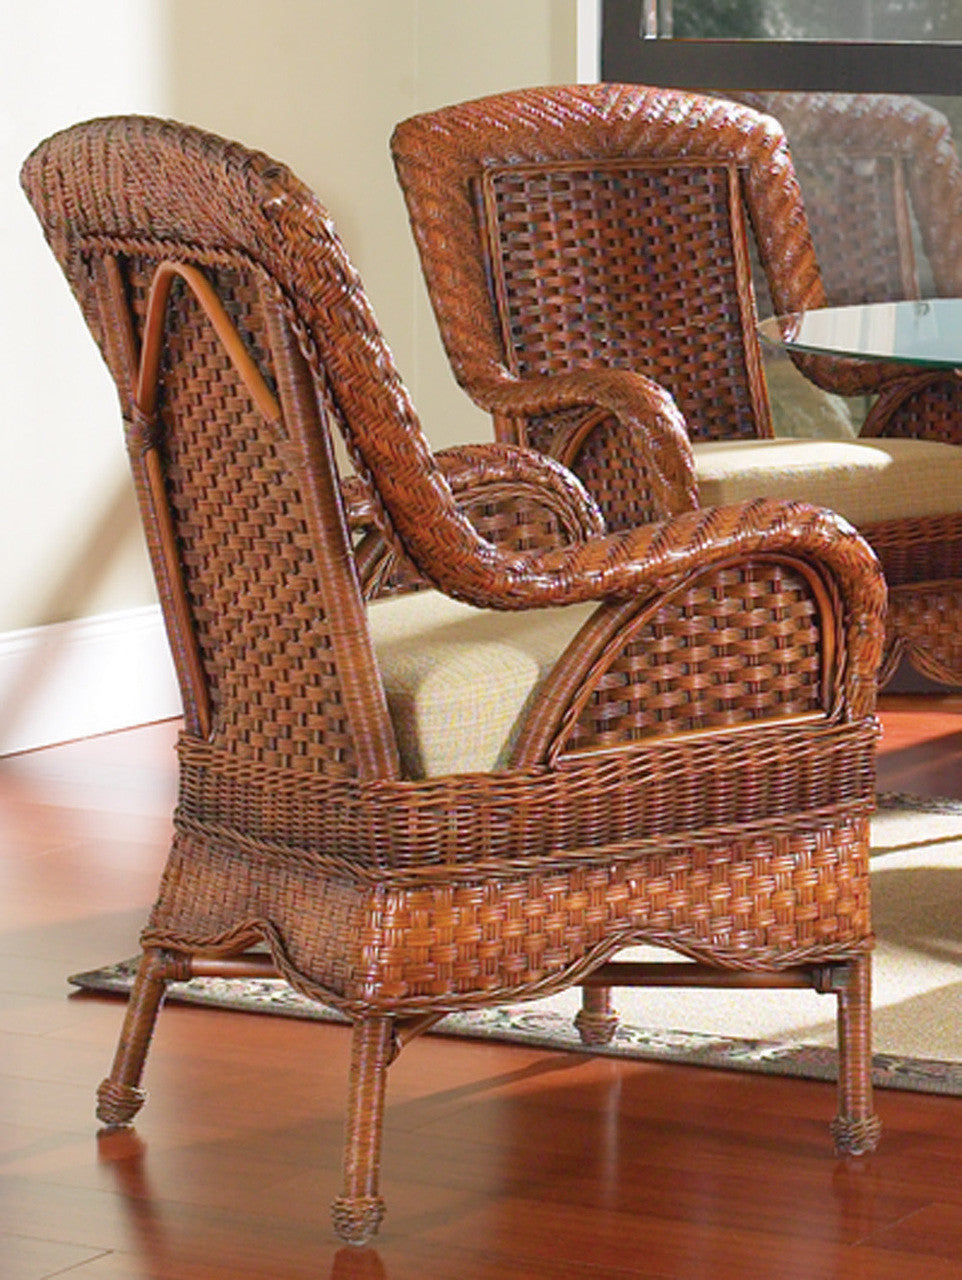 Step by Step guide: How to Cane a Chair? - Blossom Furnishings